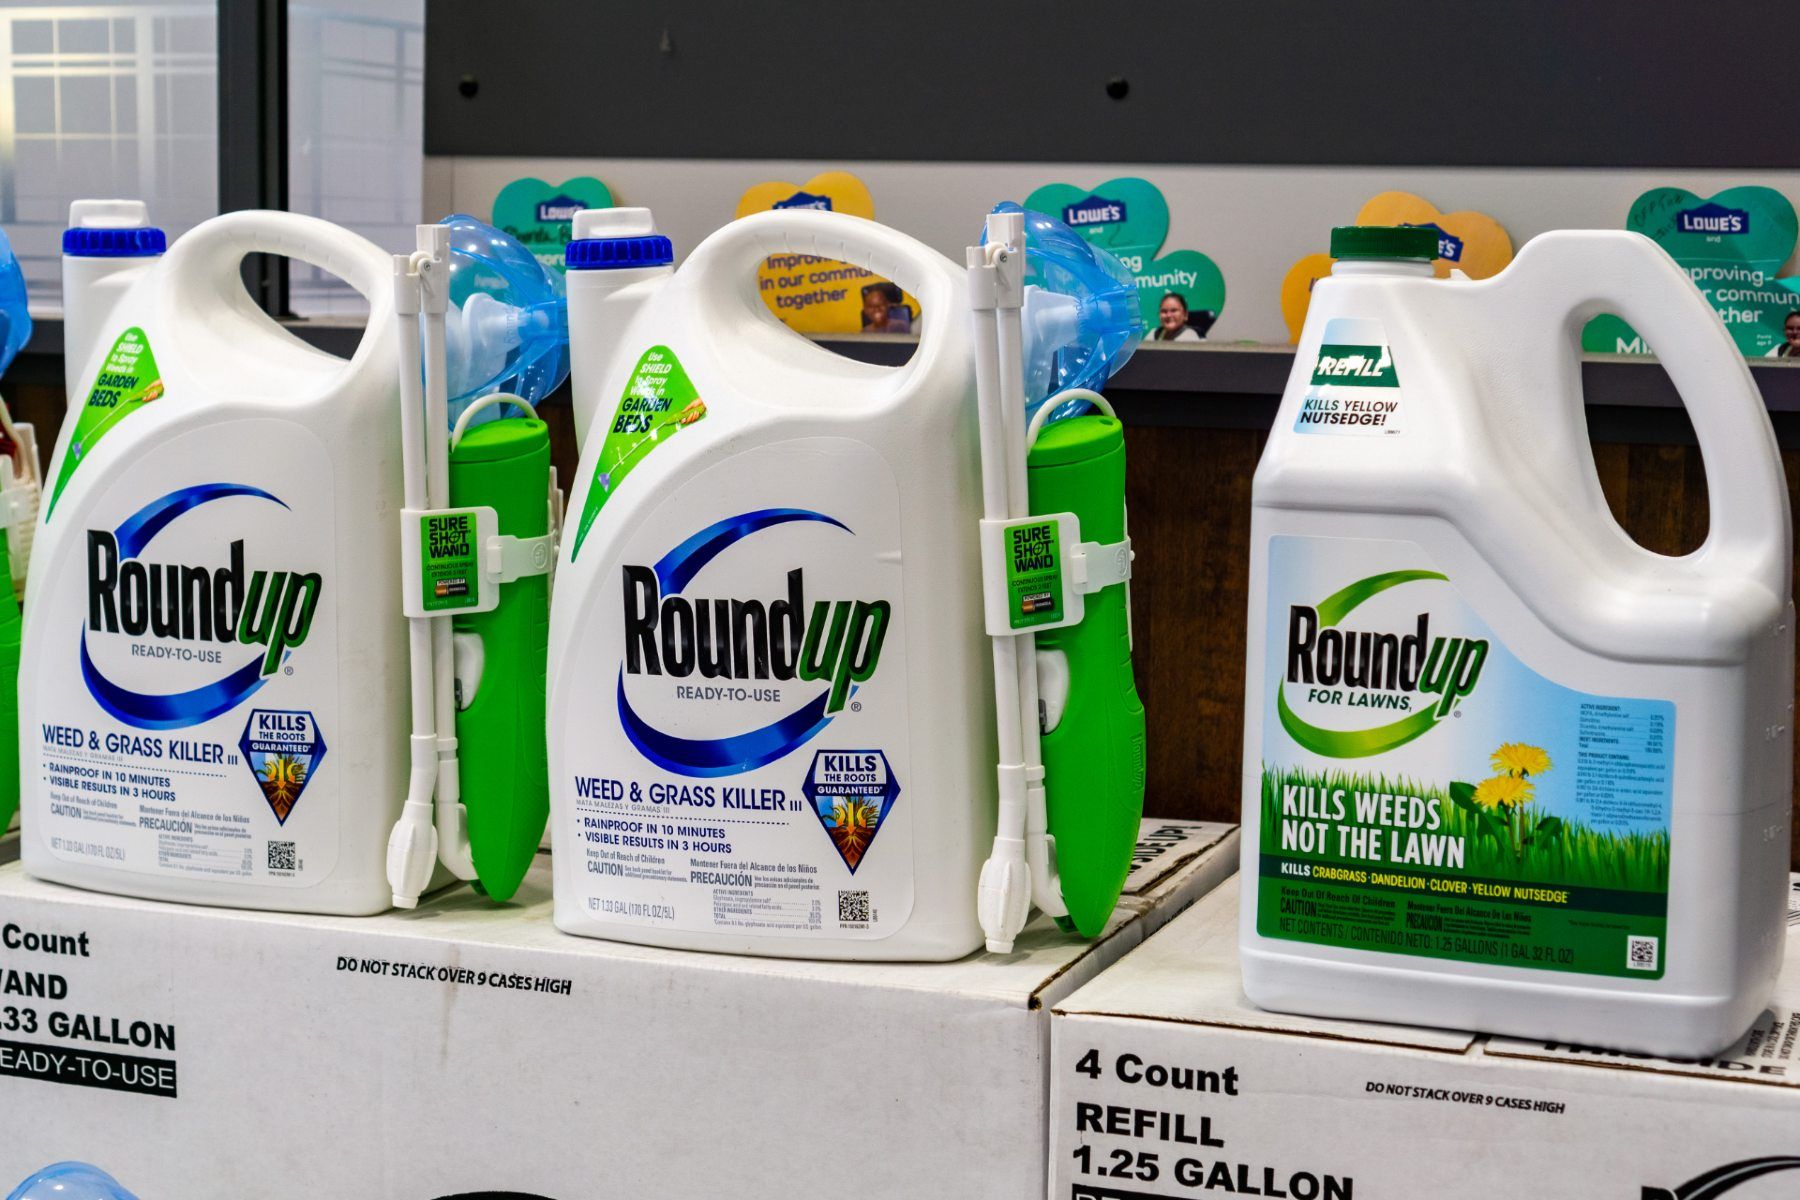 Bottles of Roundup Weed Killer at a retail store